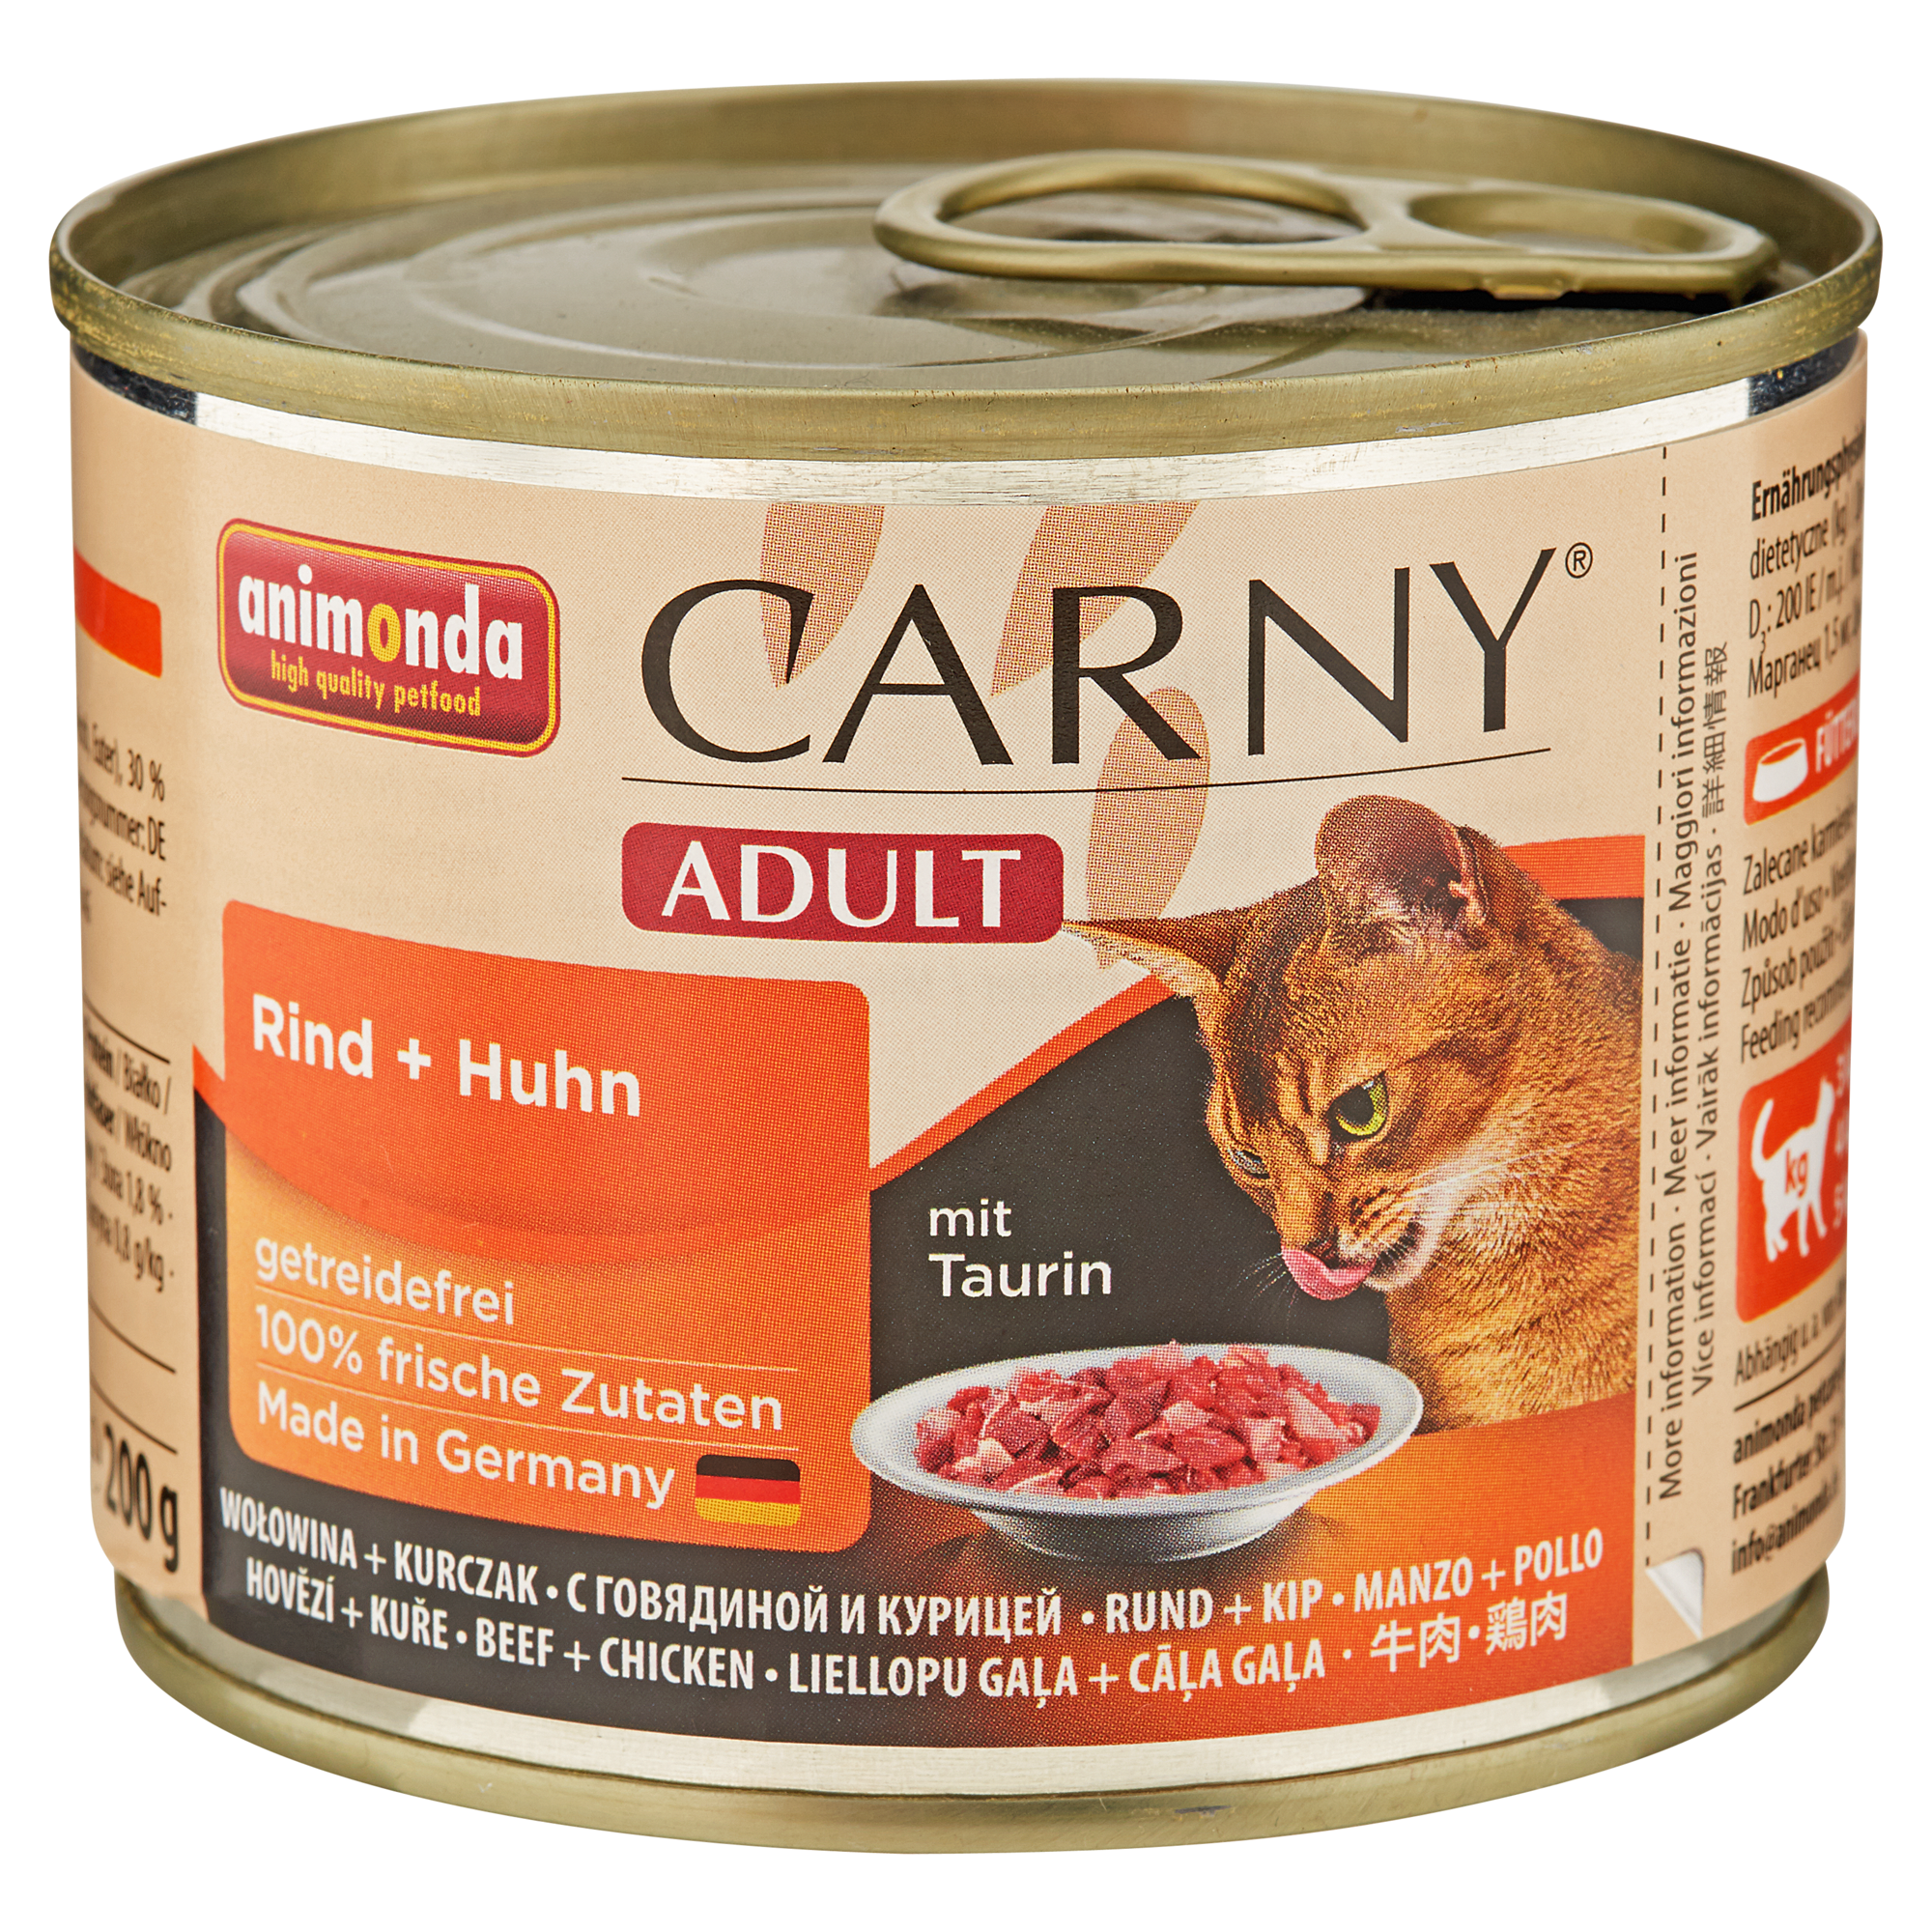 Katzennassfutter "Carny" Adult mit Rind/Huhn 200 g + product picture